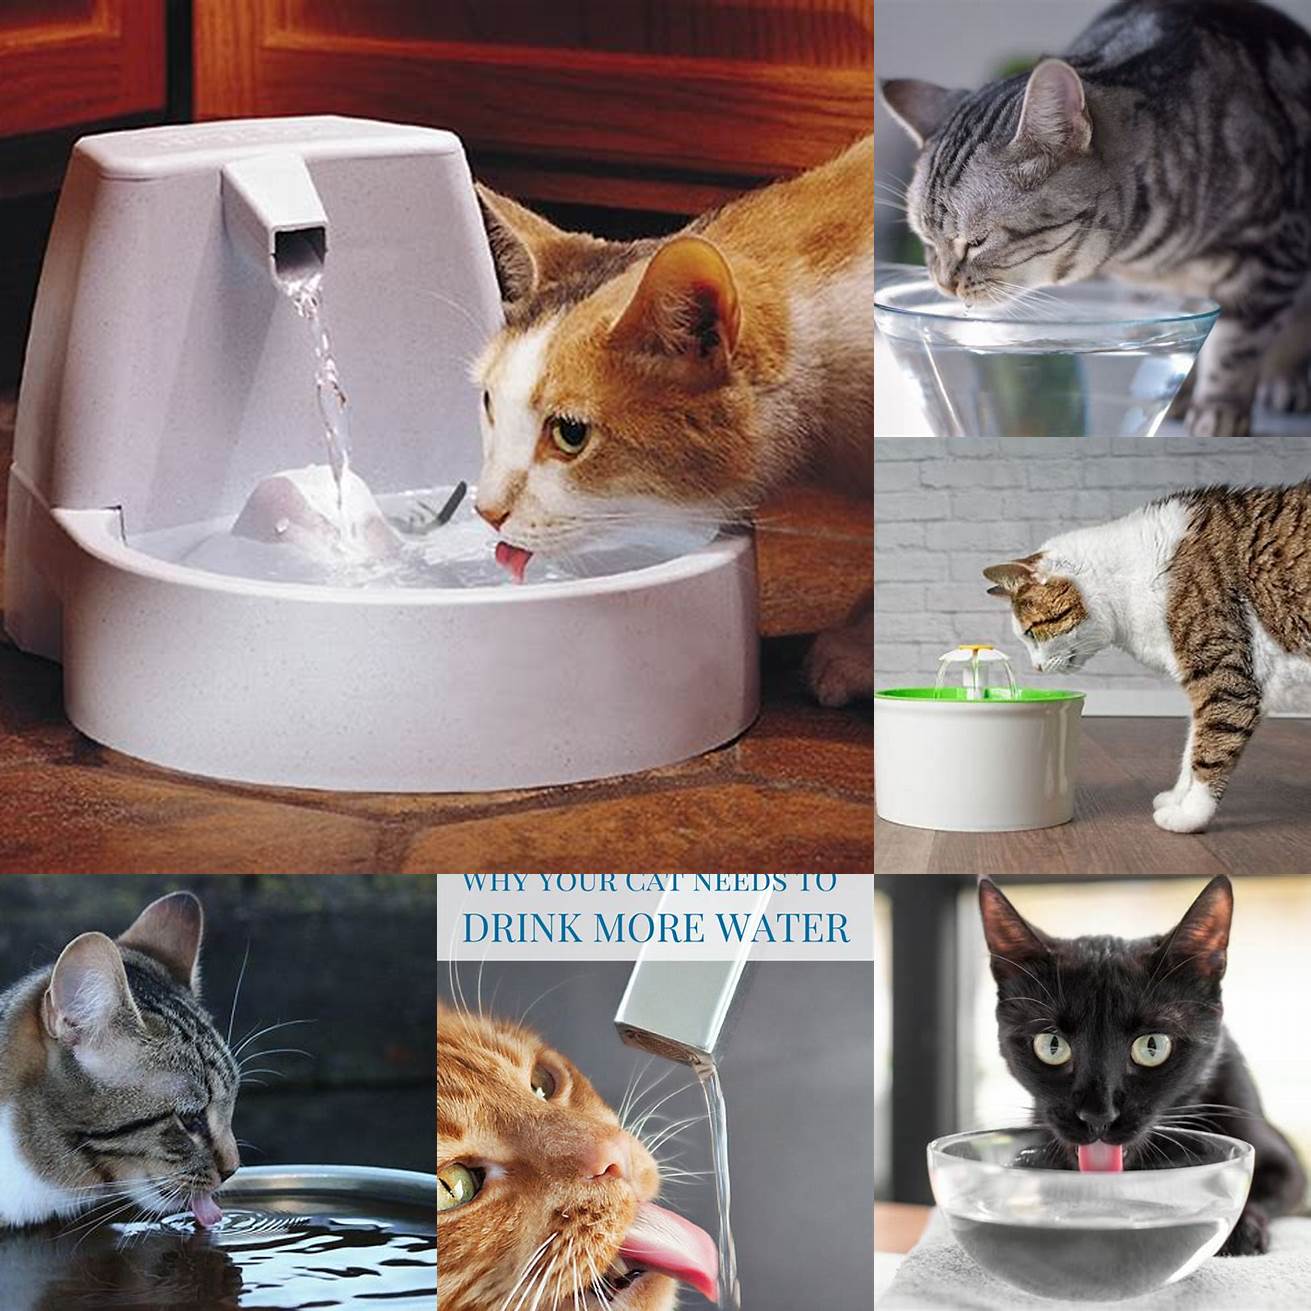 Provide your cat with fresh water and encourage them to drink more